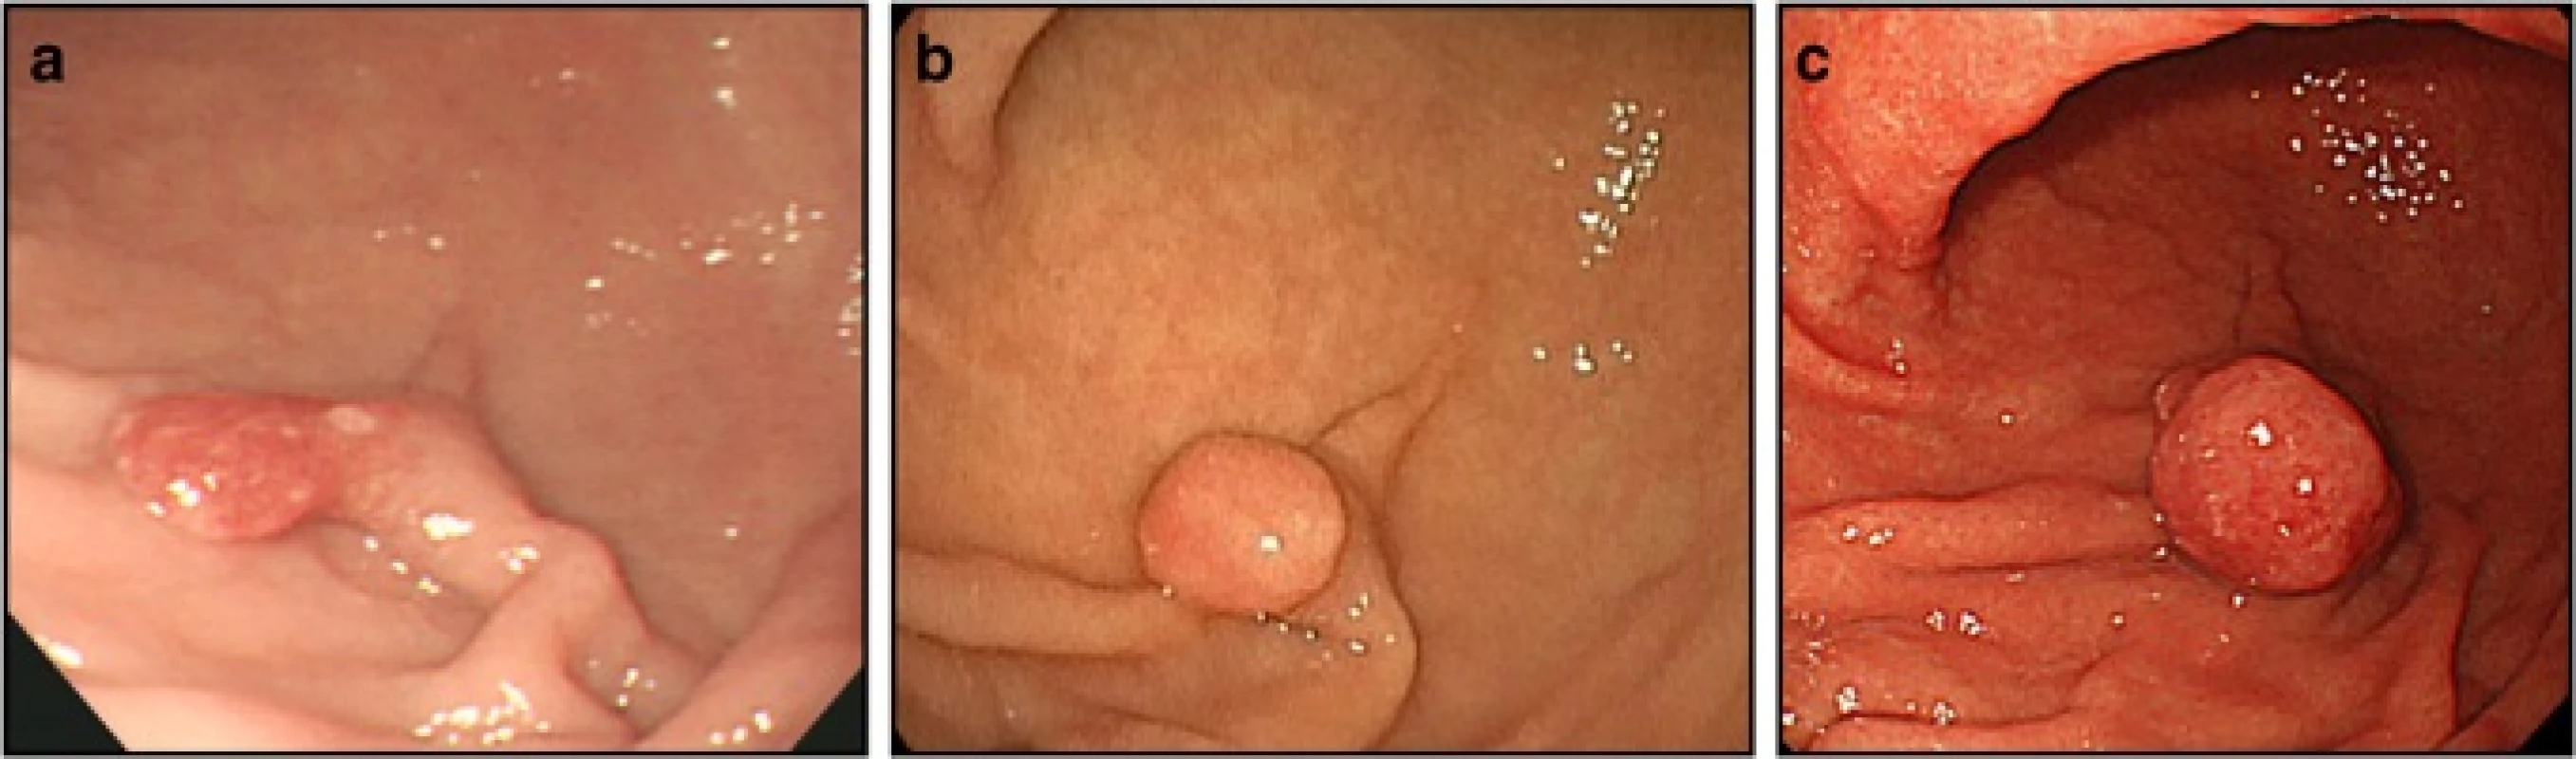 Endoscopy findings. a. In 2005, a pedunculated polyp measuring approximately 10 mm in diameter was observed on the greater curvature of the lower gastric body. The surface of the polyp was slightly reddish. On biopsy, the lesion was diagnosed as a hyperplastic foveolar polyp. b. In 2013, the pedunculated polyp on the greater curvature of the lower gastric body had grown to 12 mm in diameter. The head of the polyp was more rounded compared to the image taken in 2005. c. In 2014, the pedunculated polyp on the greater curvature of the lower gastric body had grown to 20 mm in diameter. The head of the polyp was slightly reddish, more rounded, and tense